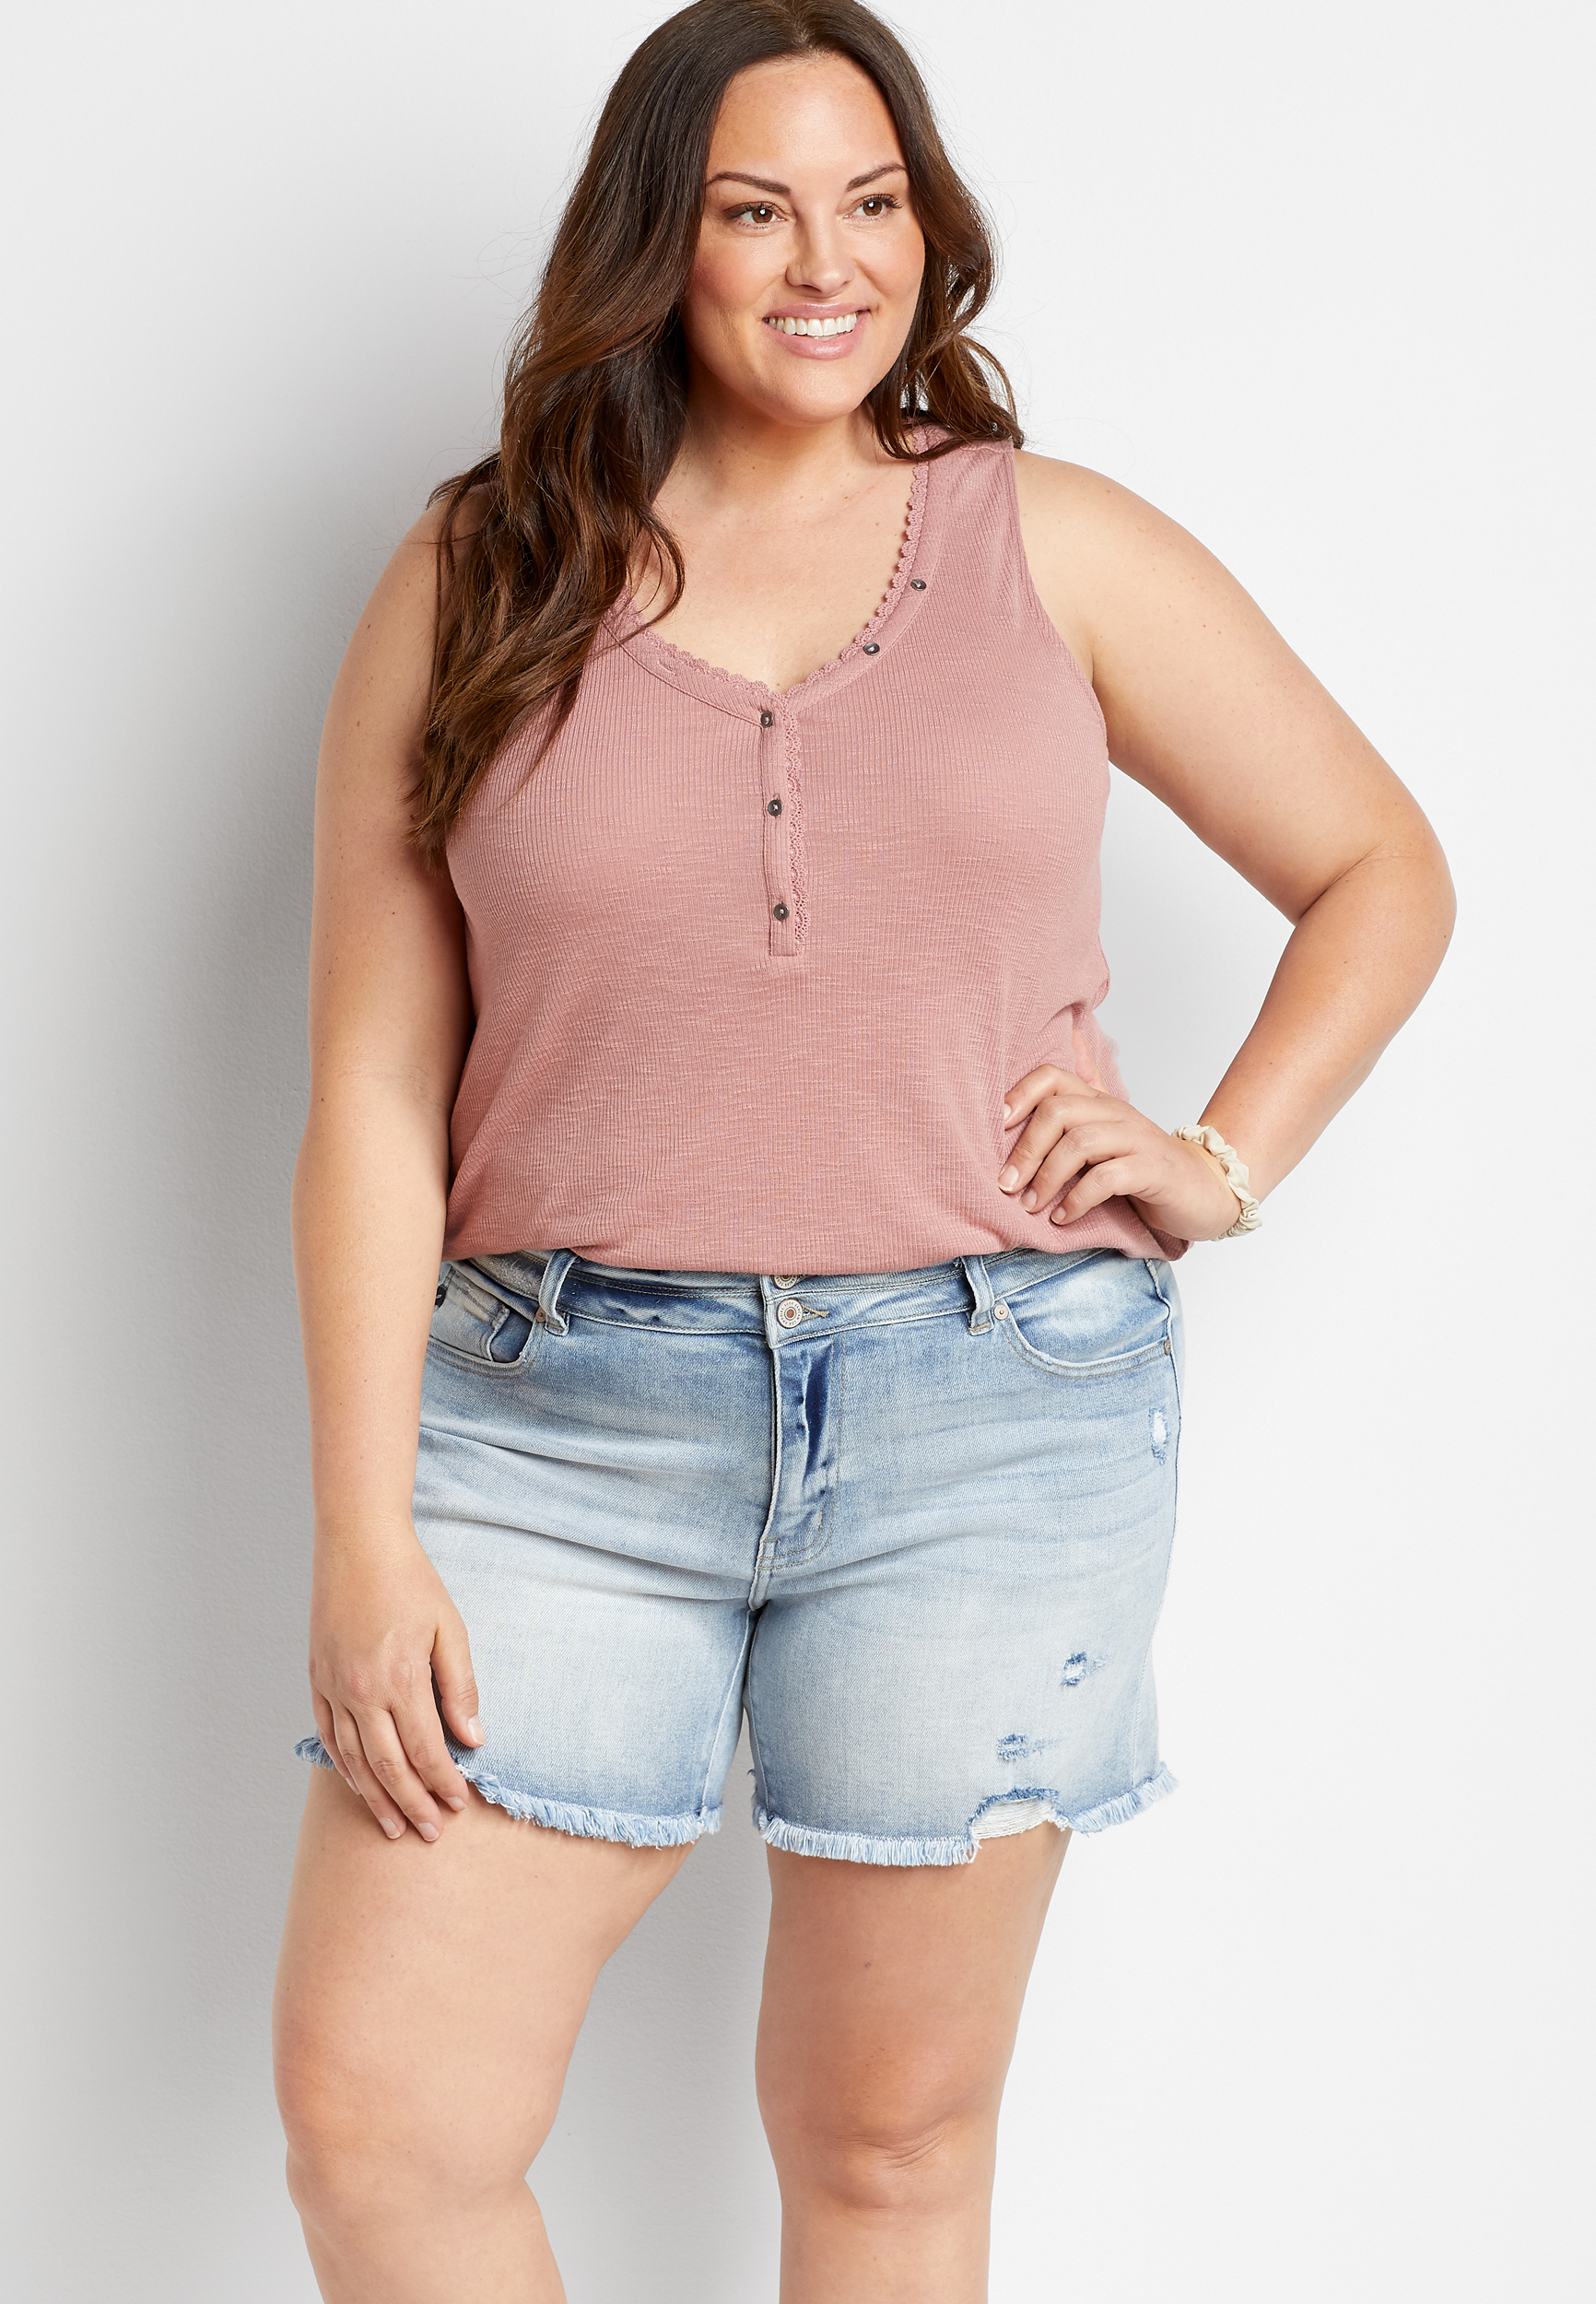 Trendy Plus Size Clothing For Women Plus Size Fashion Maurices